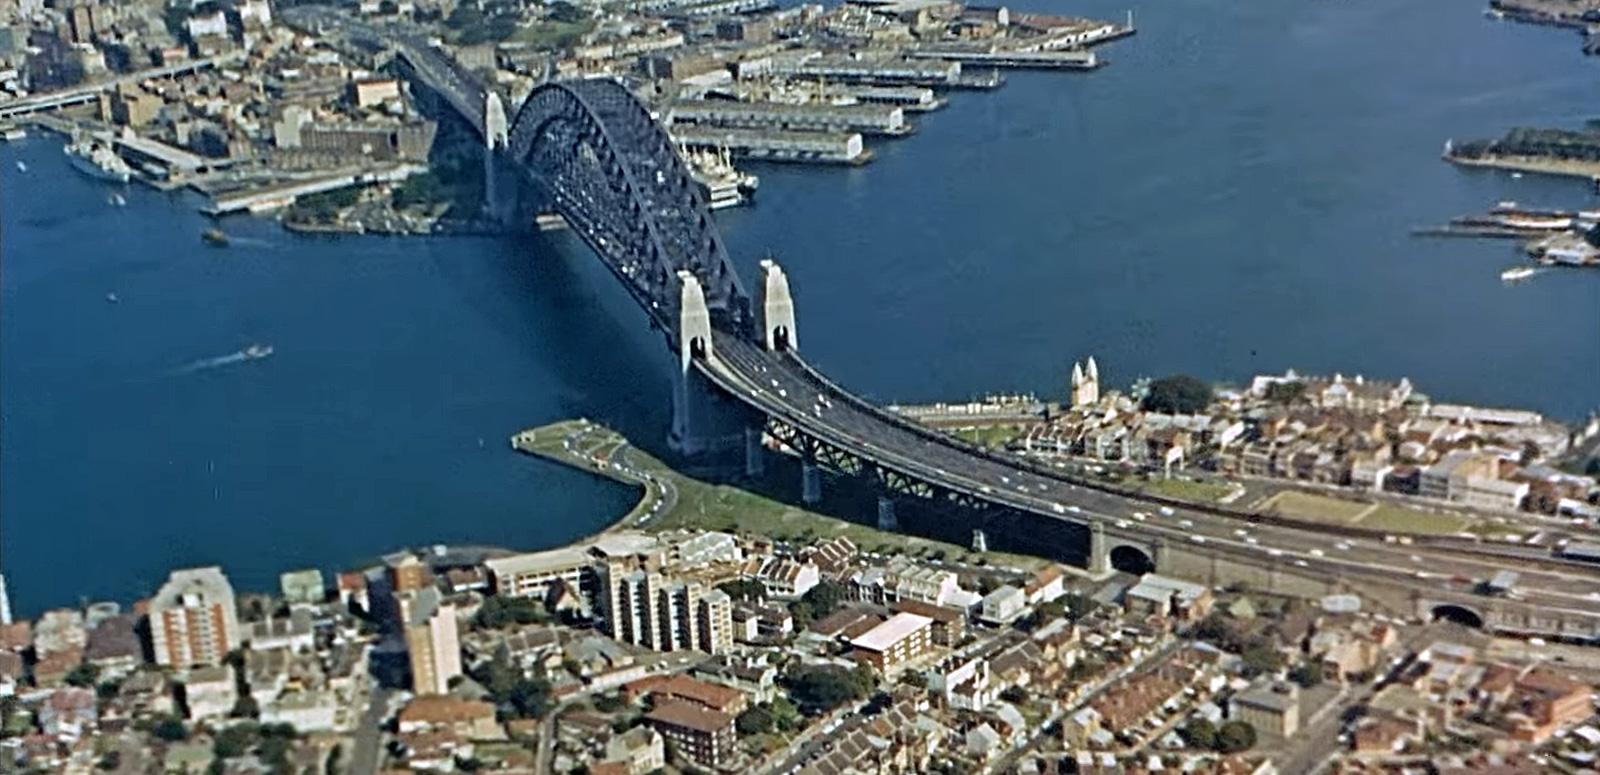 Aerial view of Sydney Harbour Bridge with Kirribilli and Milsons Point in the foreground and the Walsh Bay and Rocks area at the top of the image